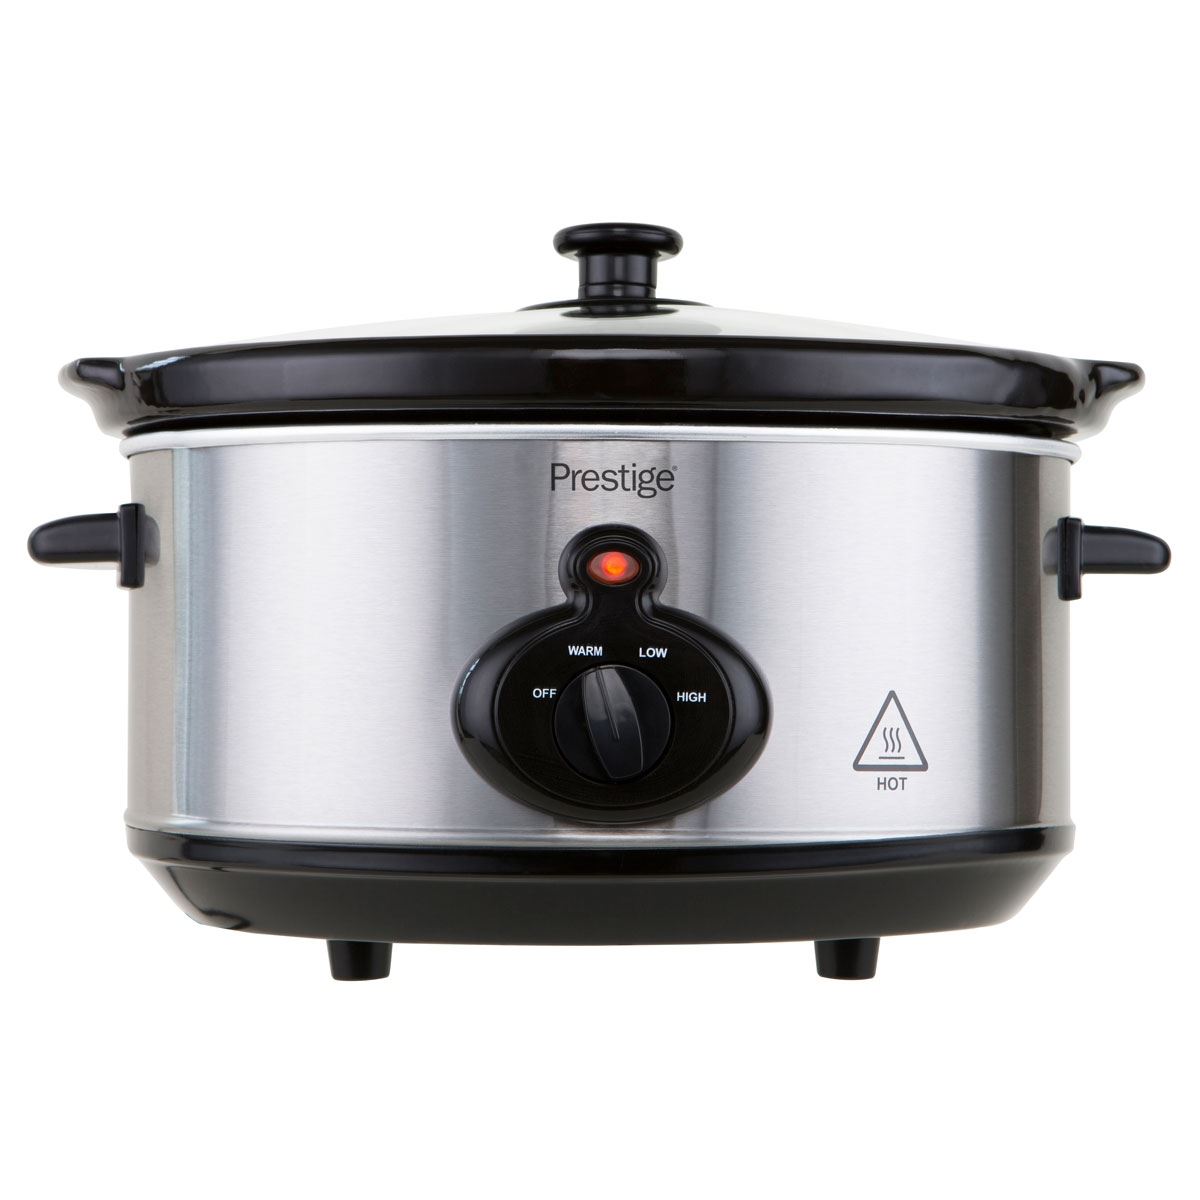 Does the Prestige Mechanical Slow Cooker feature a non-stick cooking surface?